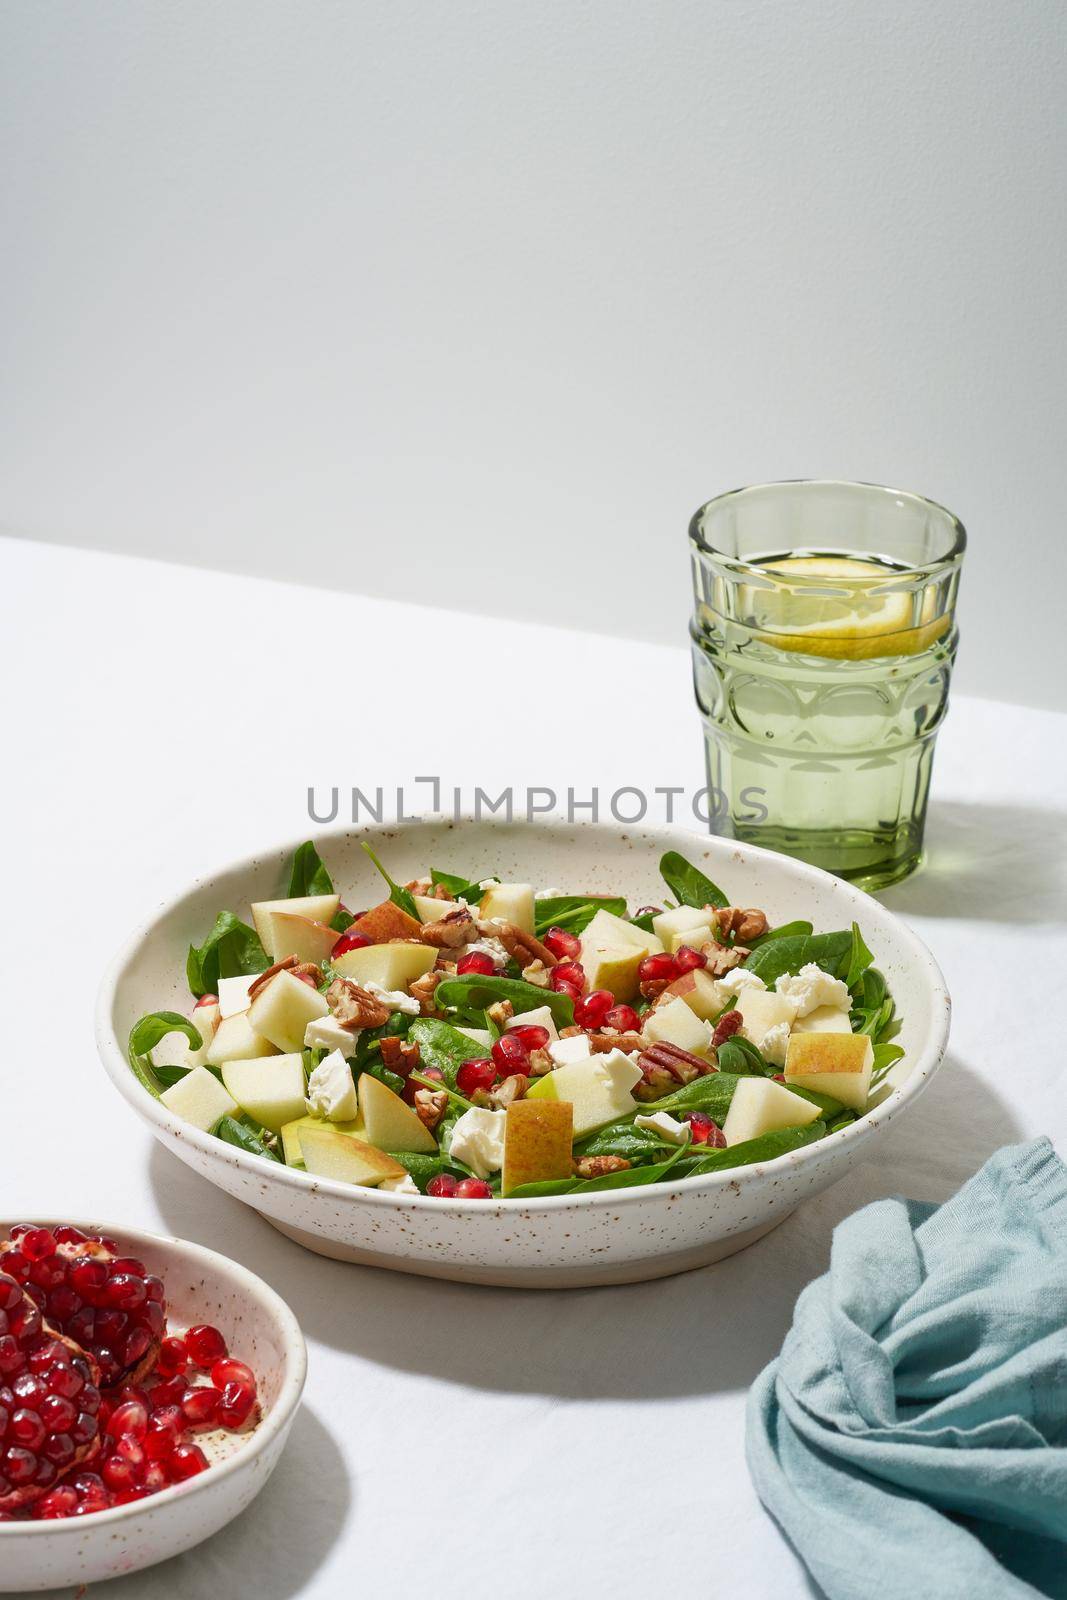 Fruits salad with nuts, balanced food. Hard light, shadows. Spinach with apples, pecans, vertical by NataBene